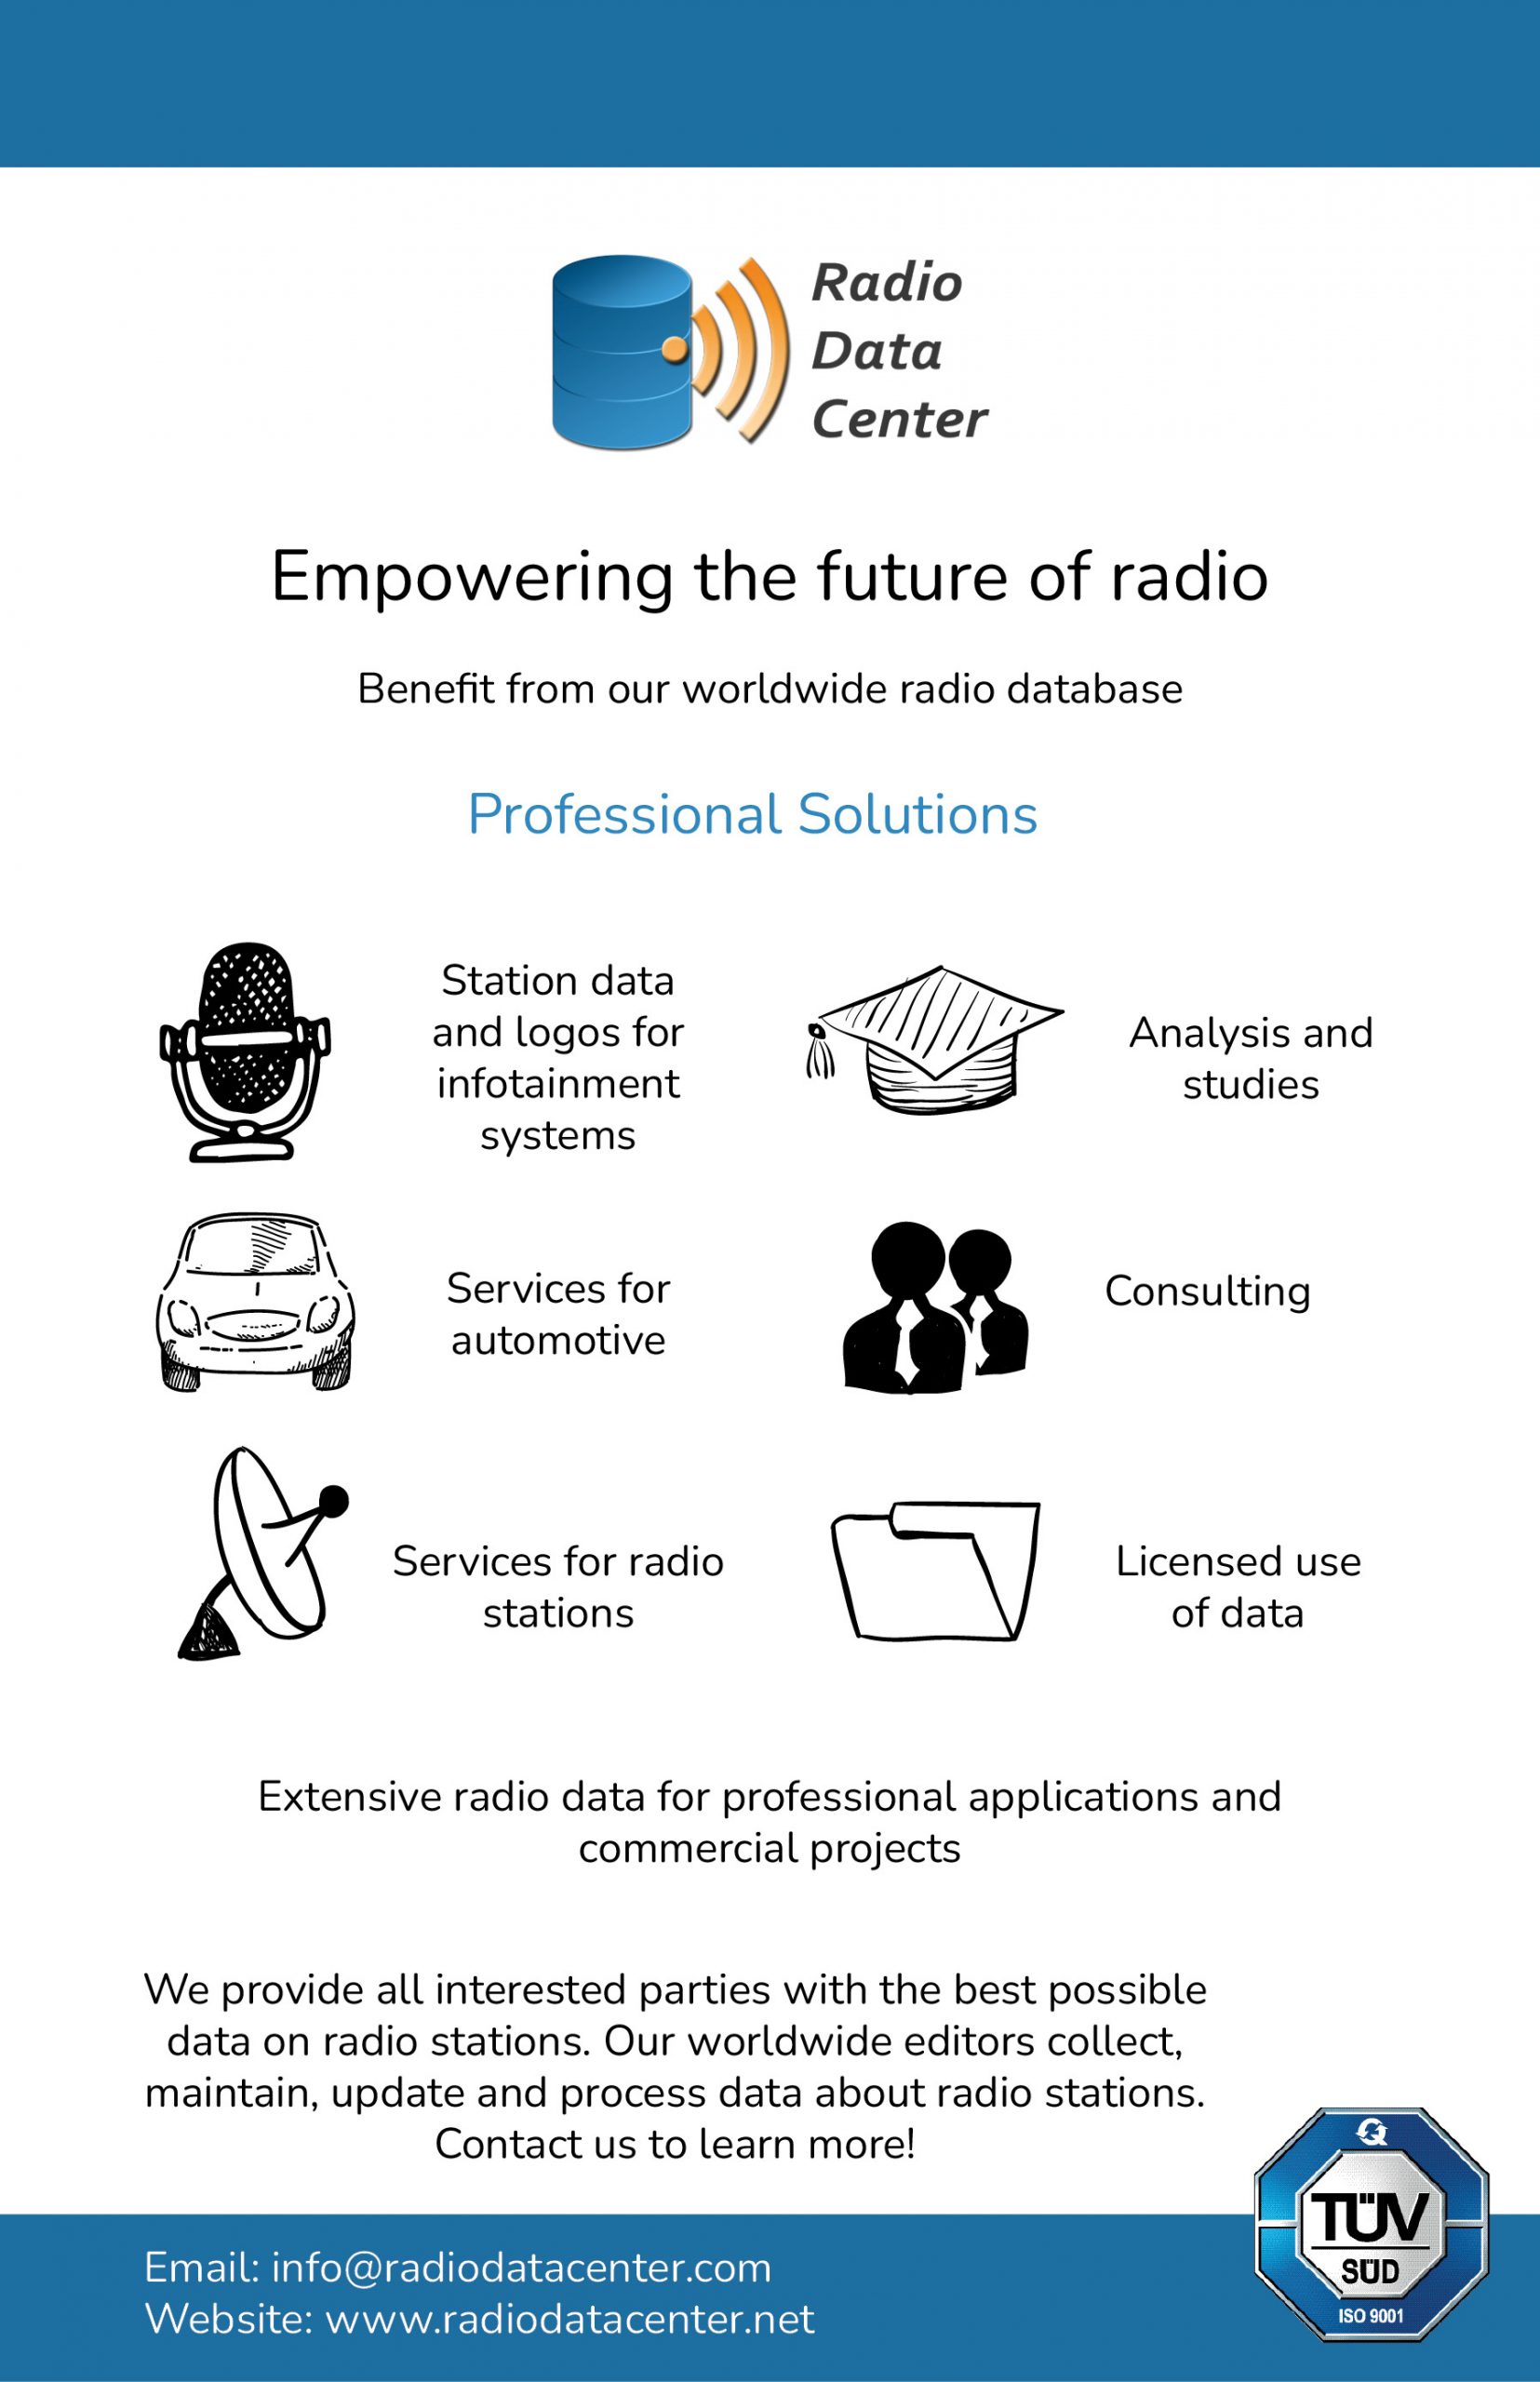 Advertisement from Radio Data Center for their different services